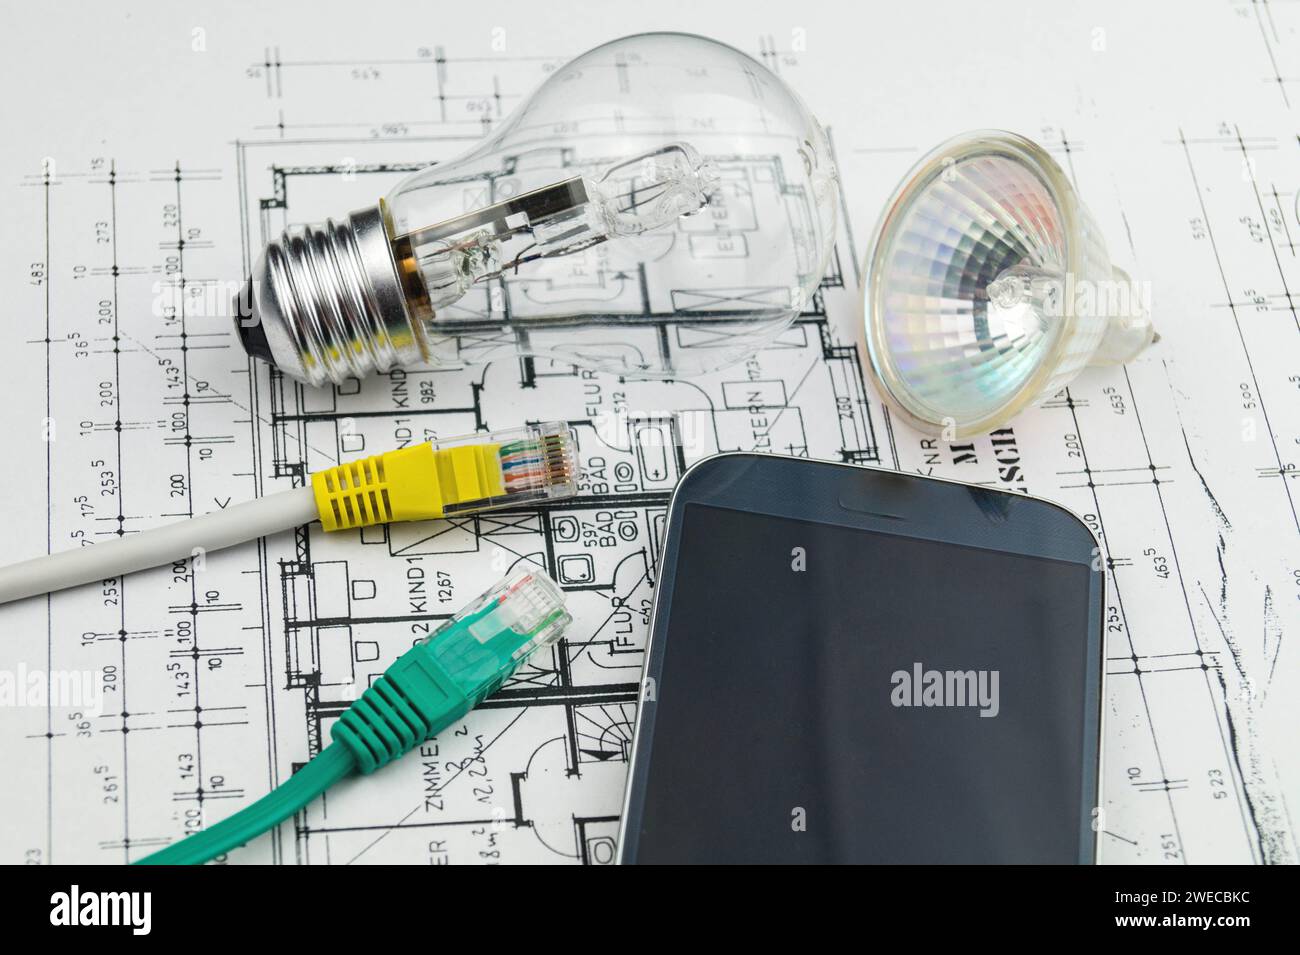 Network plug, lamps and smartphone on construction drawing, symbolic image for Smart Home Stock Photo